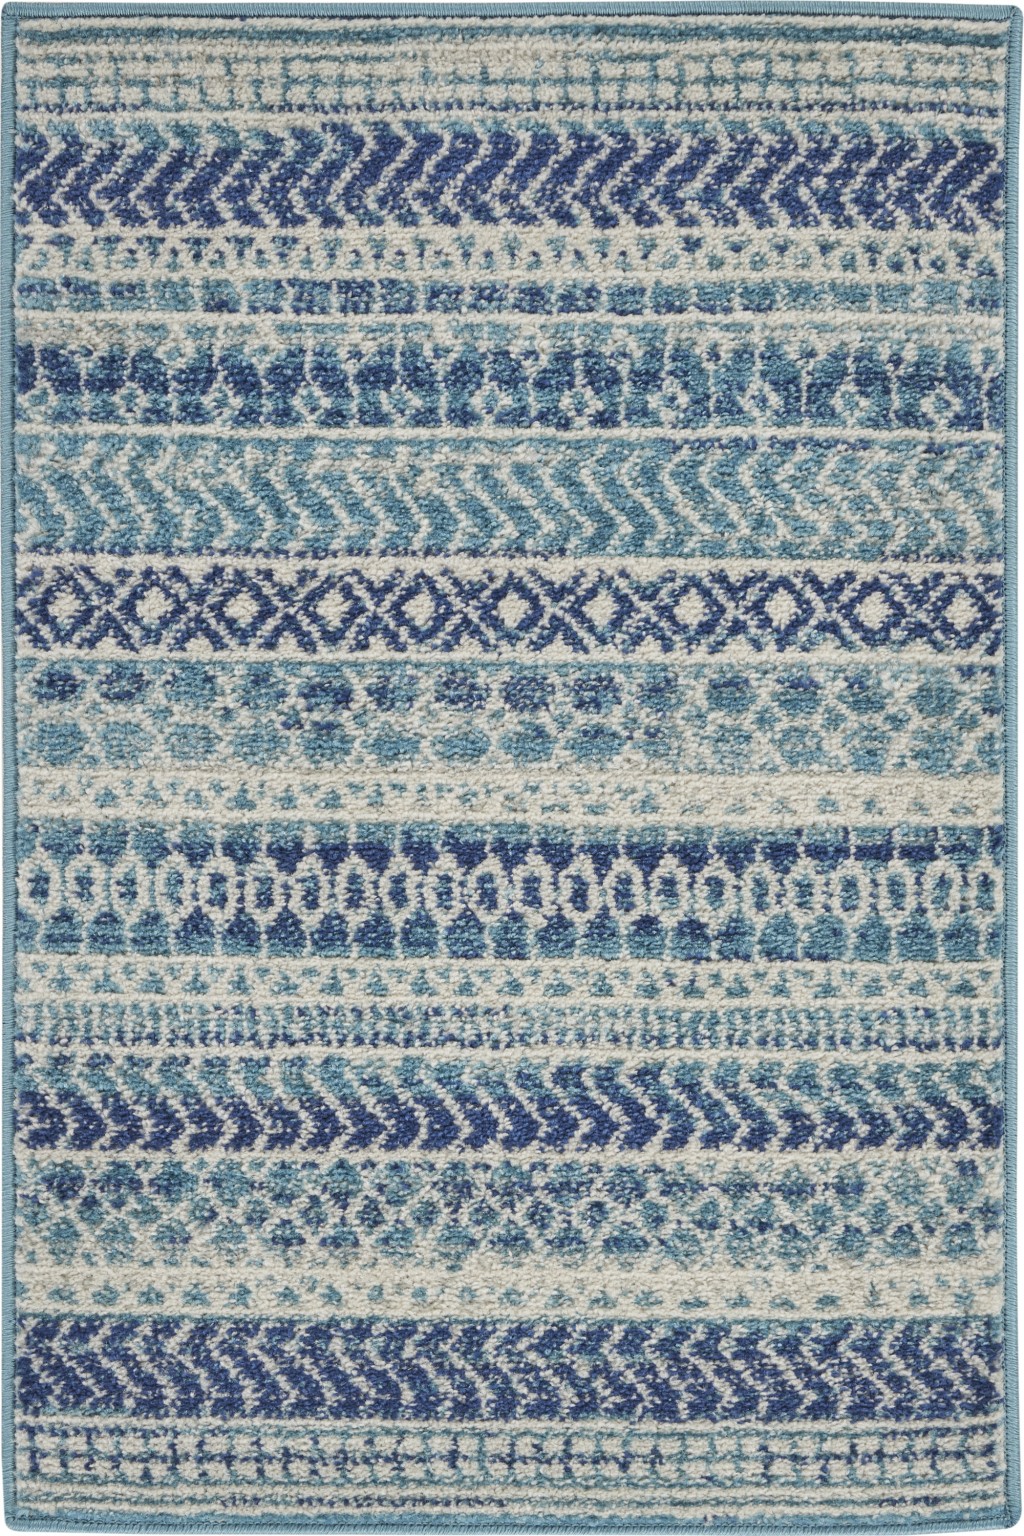 2' x 3' Blue and Ivory Striped Power Loom Area Rug-385595-1